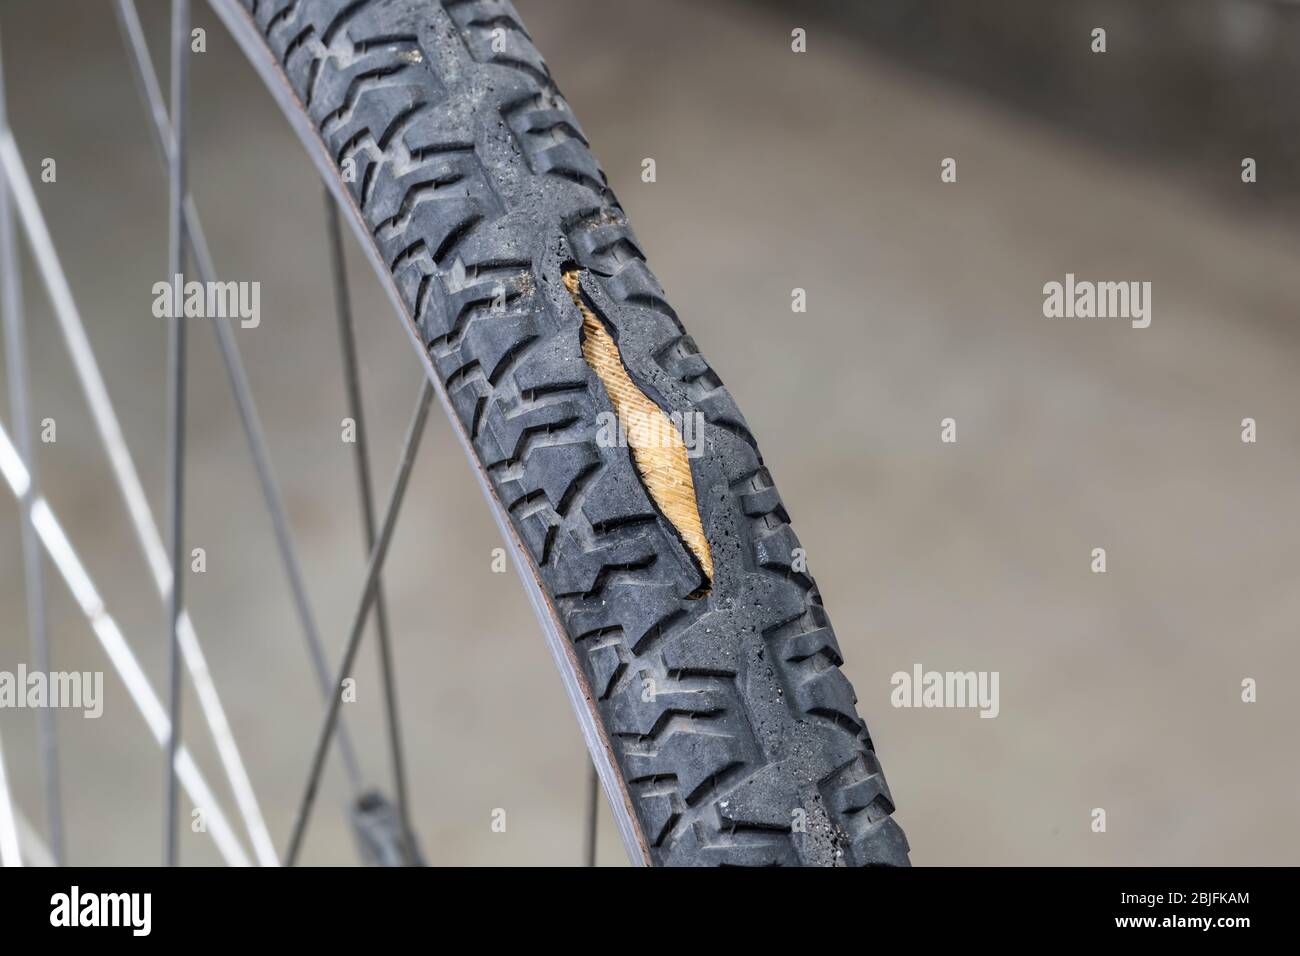 Split rubber tread with cord showing on old worn out bicycle tire. Stock Photo